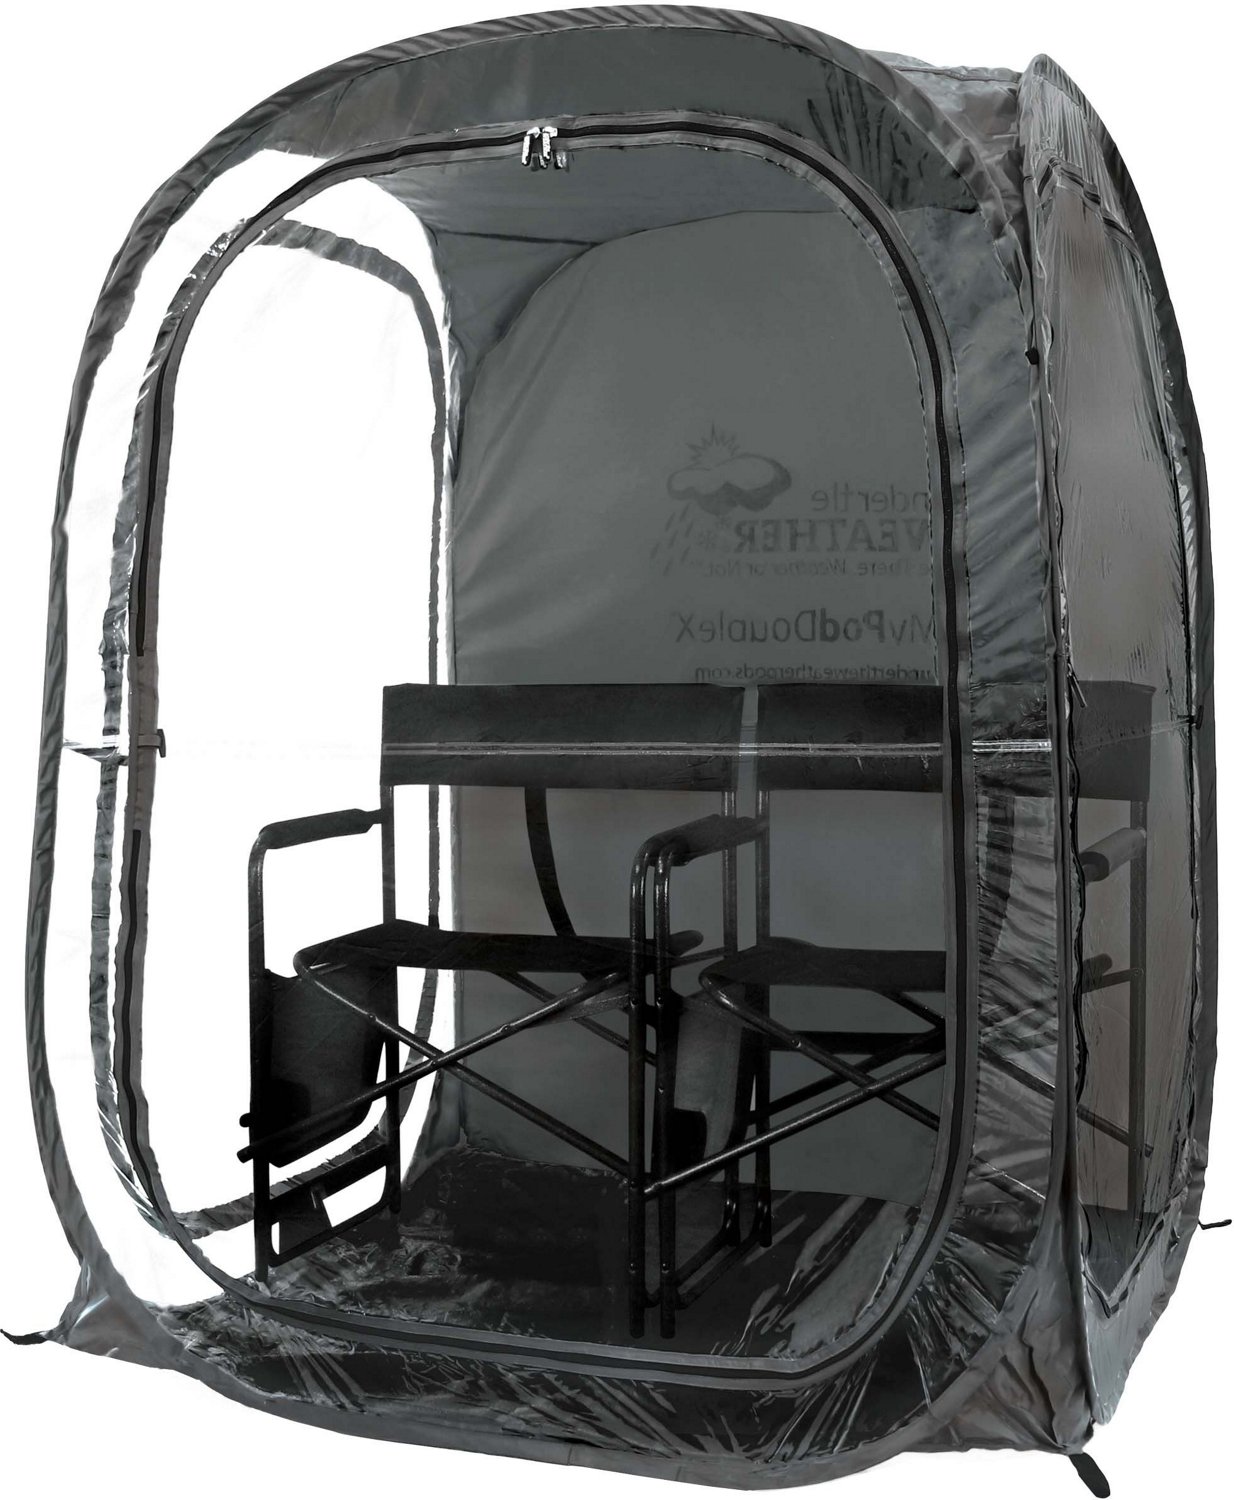 Protection from Cold Wind and Rain Under the Weather MyPod 2XL Pop-Up Weather Pod 